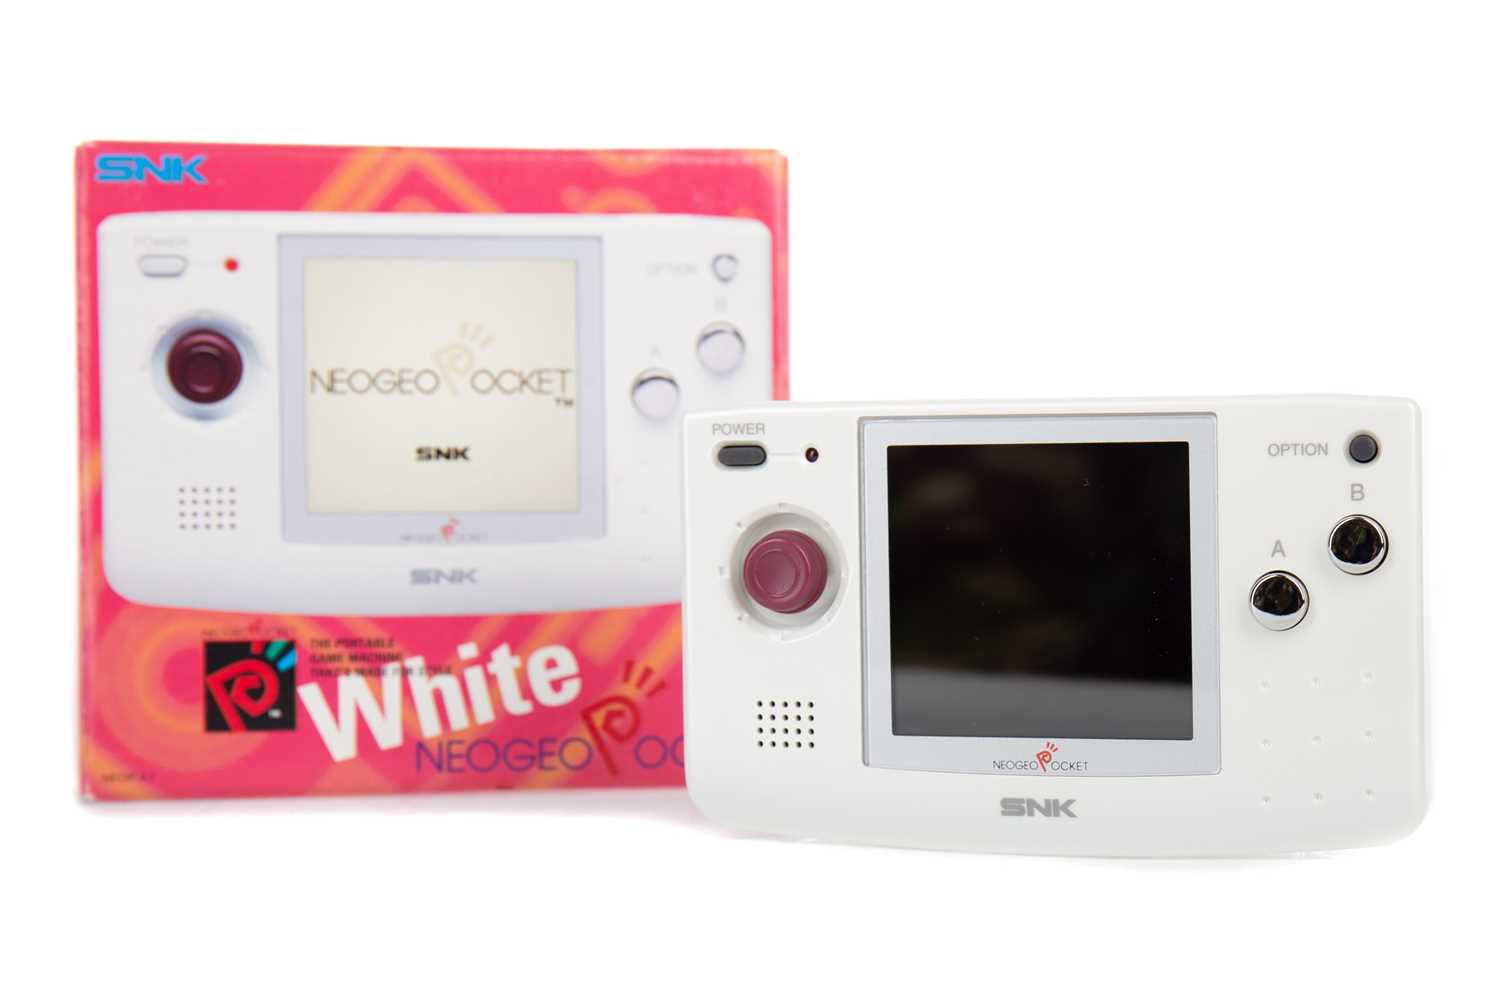 Lot 1101 - AN SNK NEO GEO POCKET CONSOLE